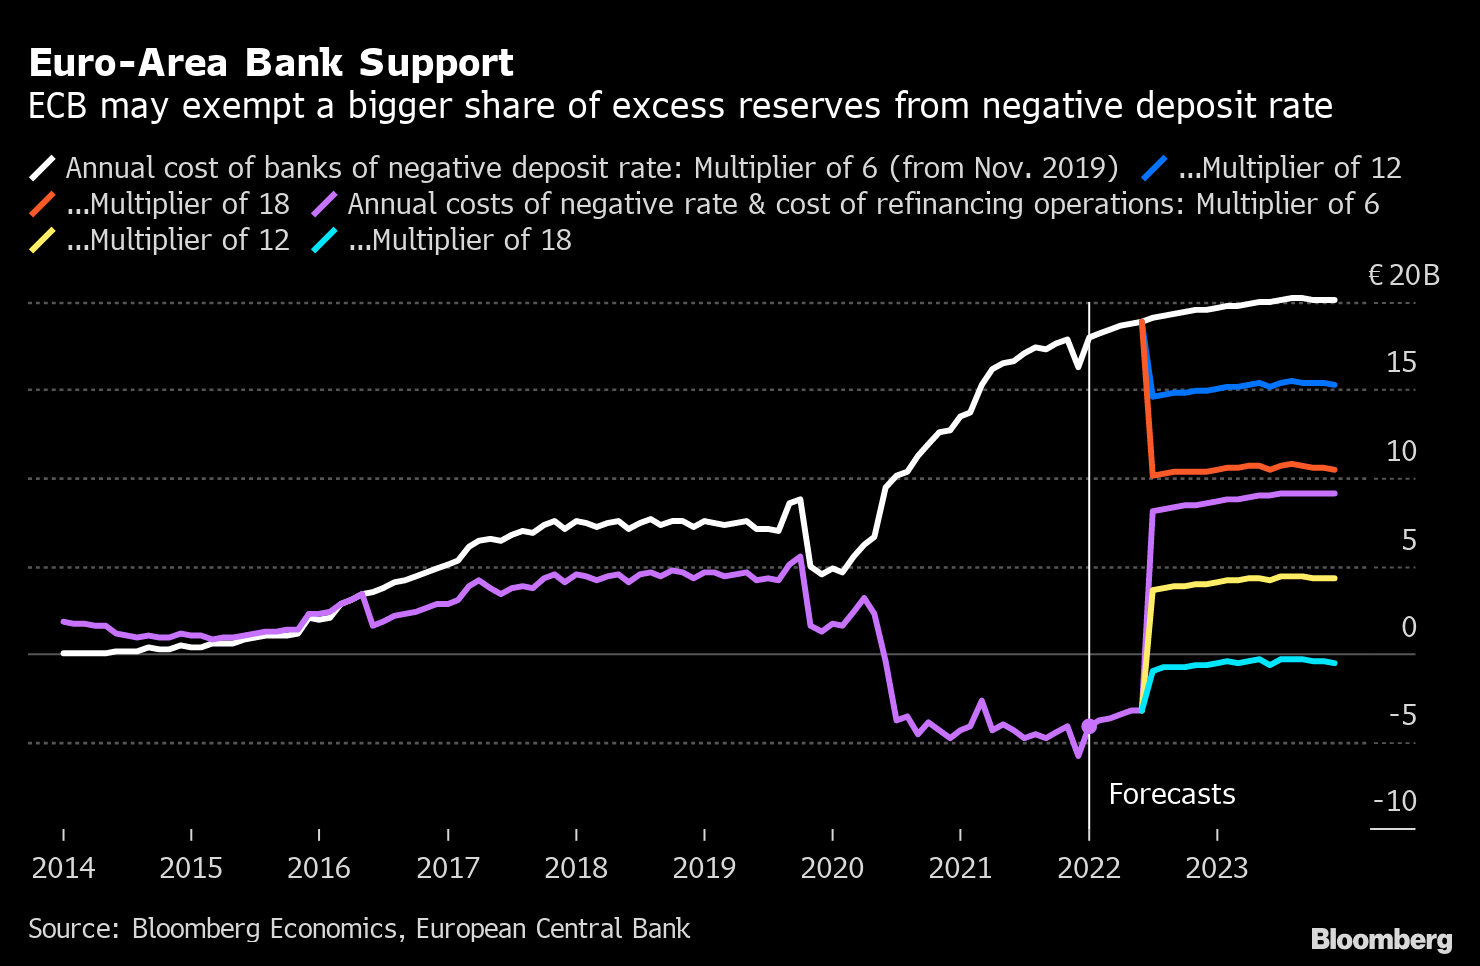 Euro-Area Bank Support